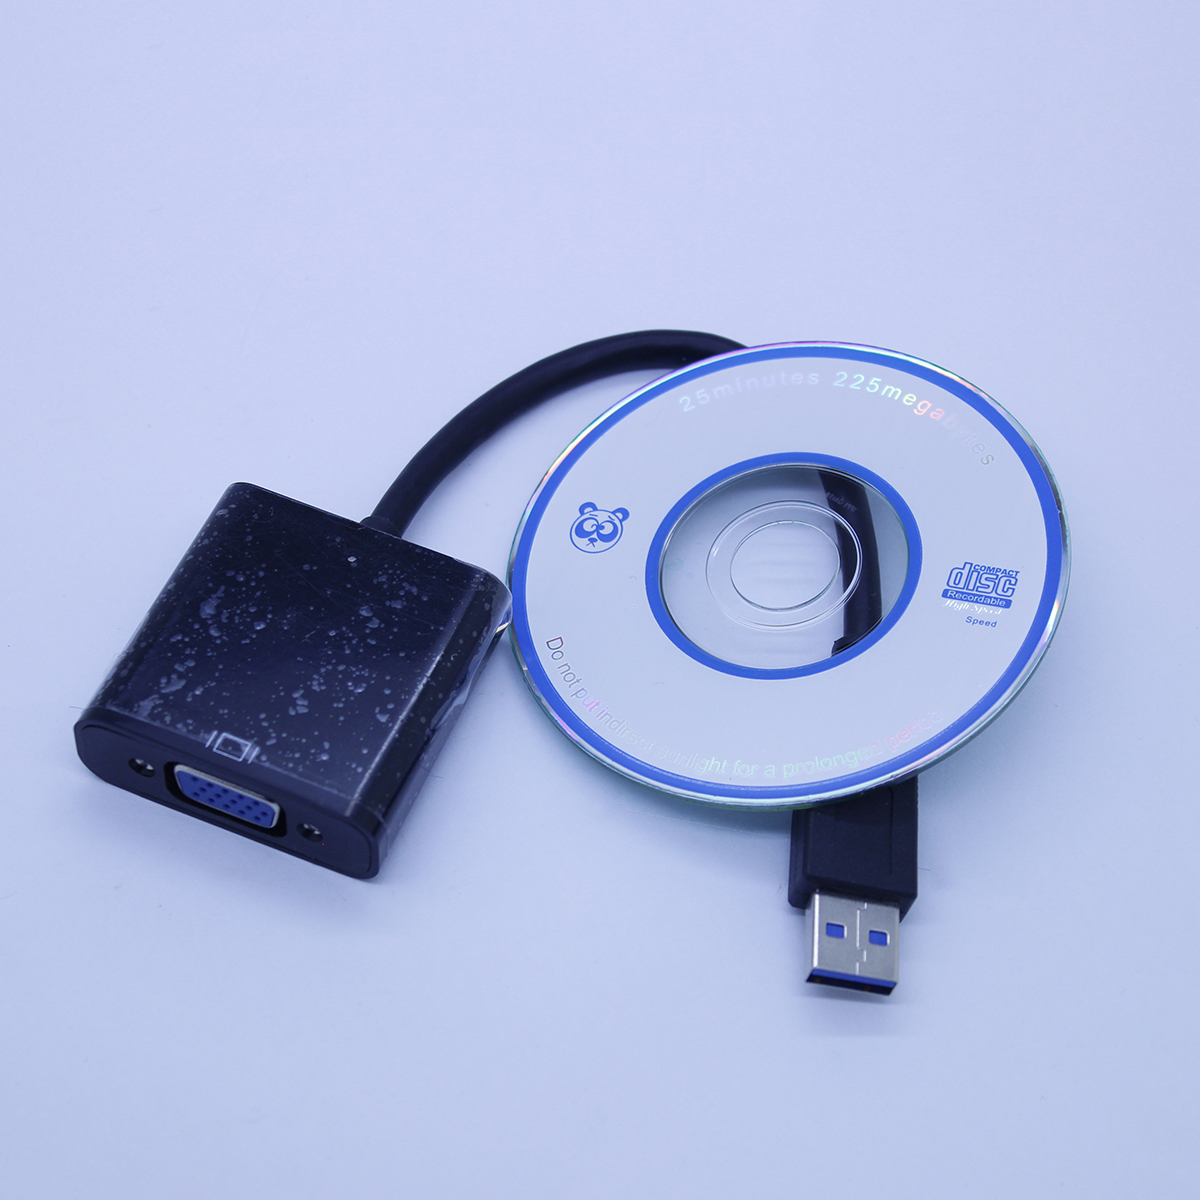 90 Degree Angle Usb 3.1 Type c Male To Usb 3.0 Female Otg Adapter Cable